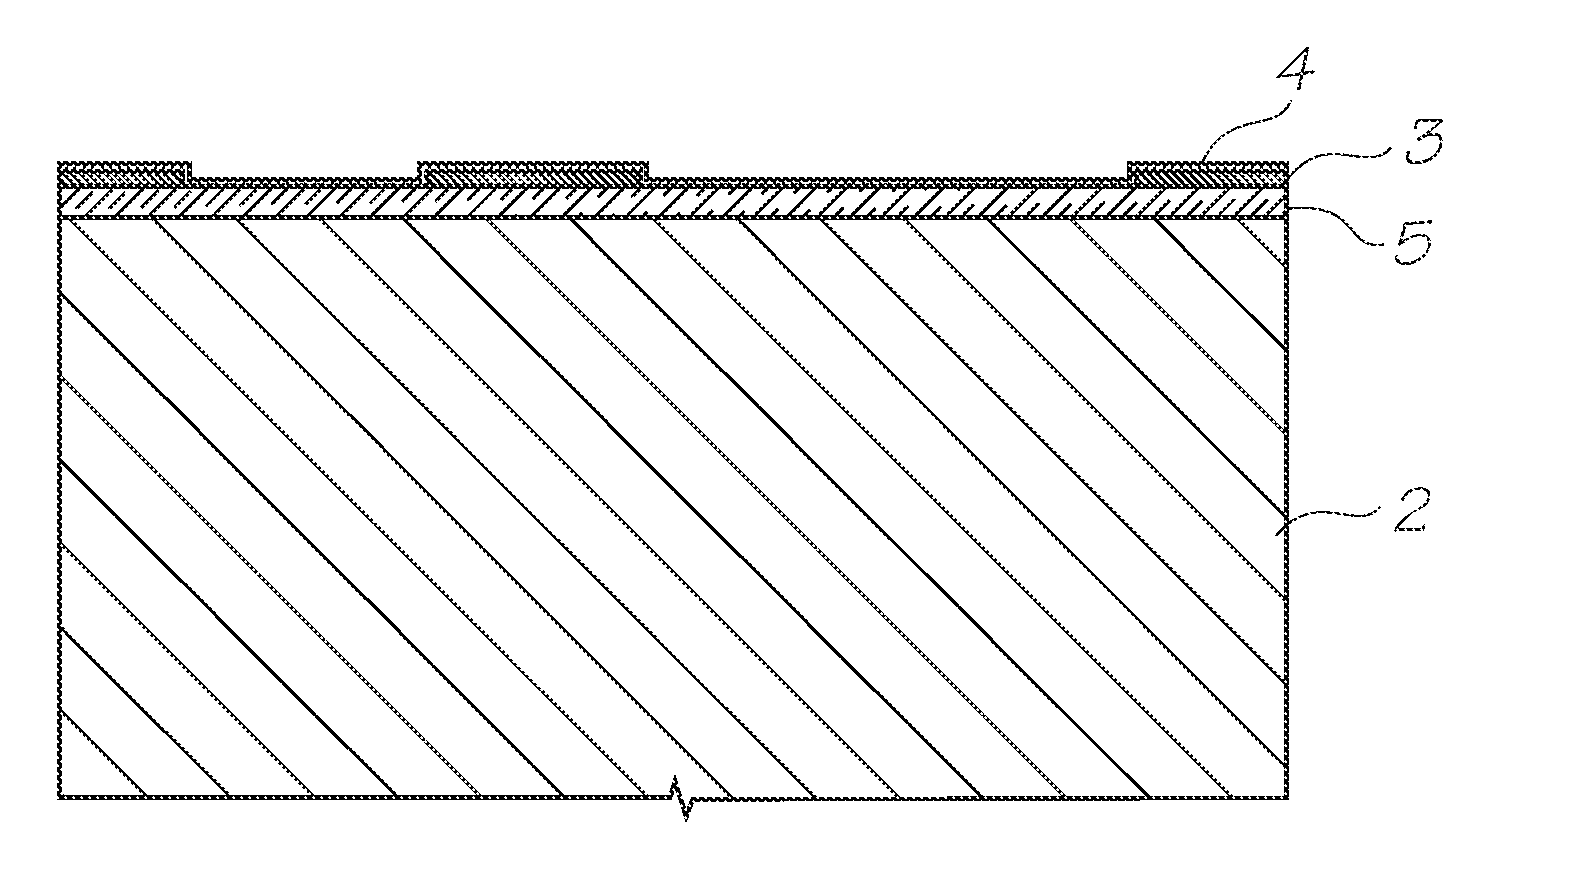 Method of fabricating inkjet printhead with projections patterned across nozzle plate